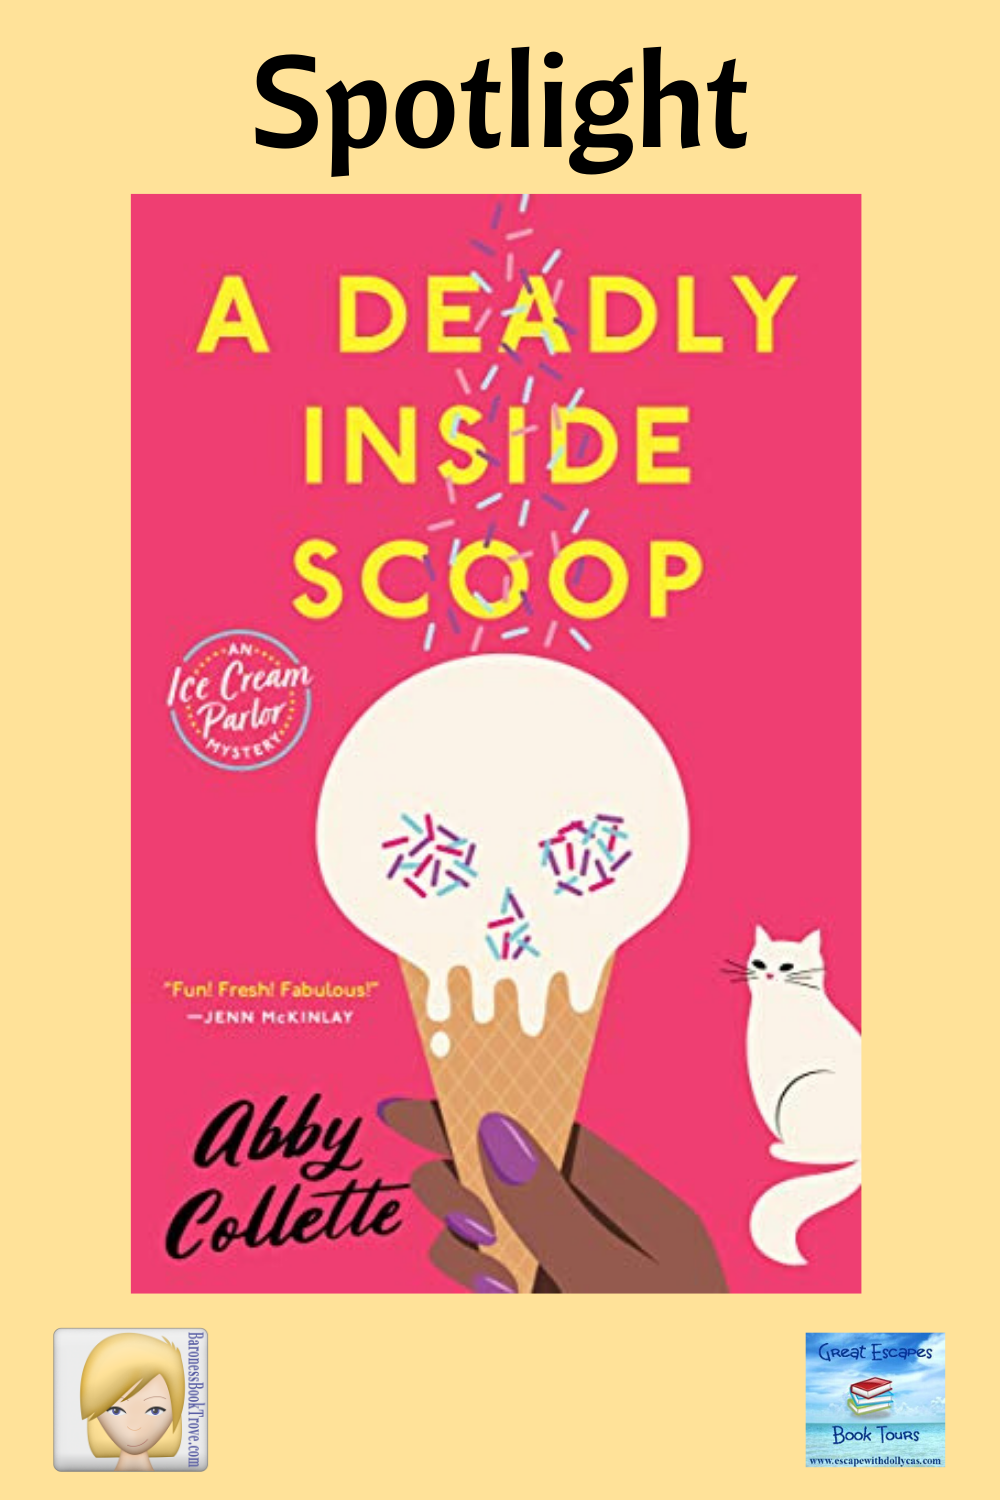 A Deadly Inside Scoop by Abby Collette ~ Spotlight